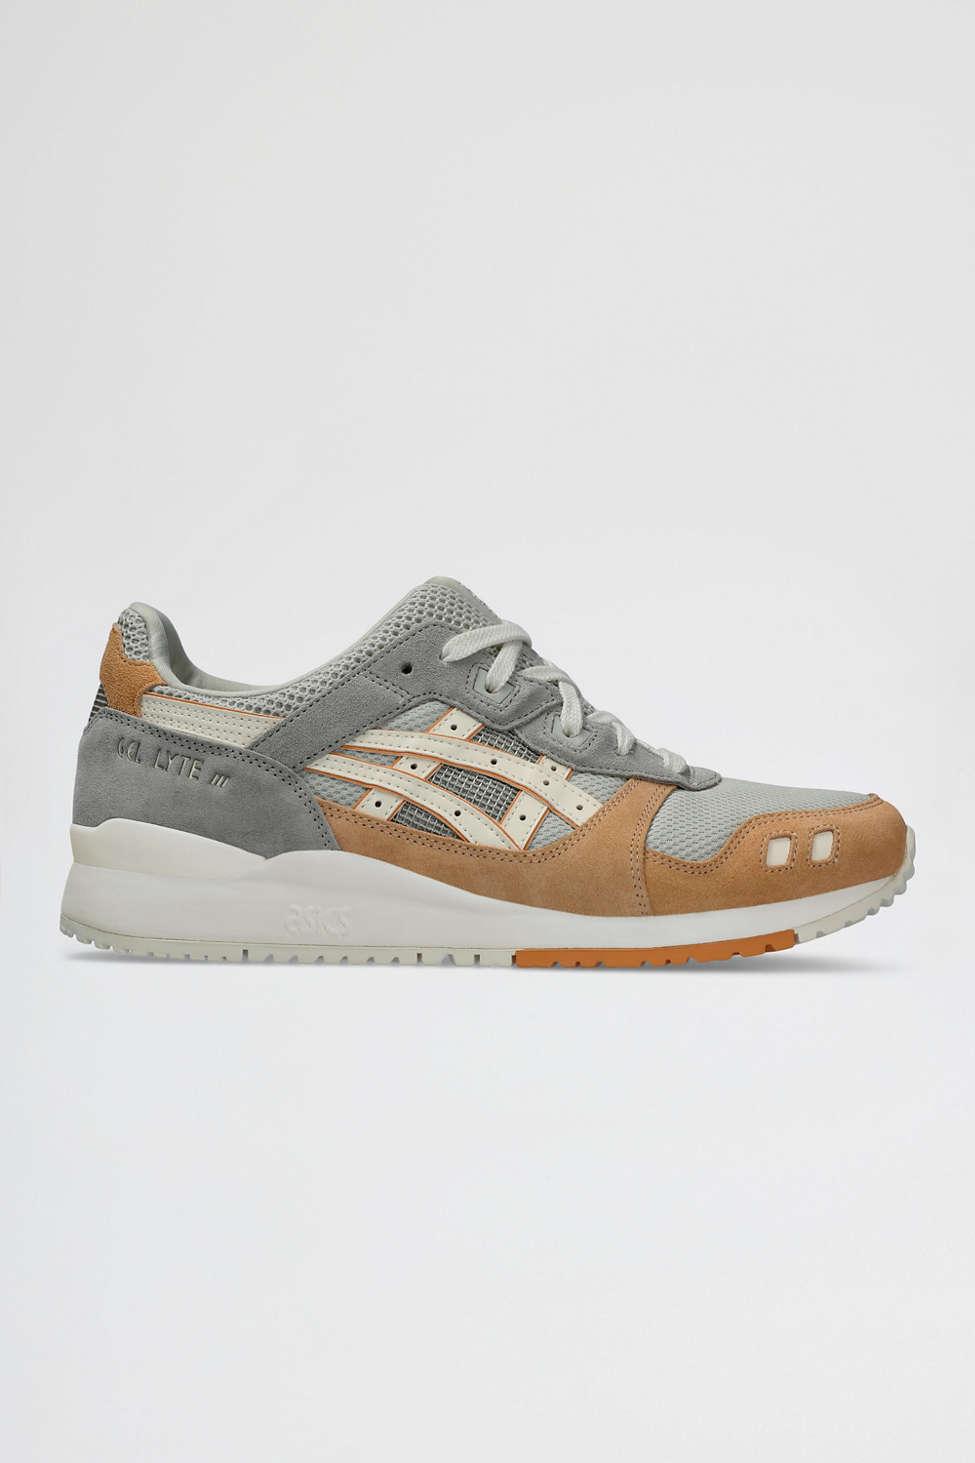 Asics Gel-lyte Iii Og Sportstyle Sneakers In White Sage/cream At Urban  Outfitters | Lyst